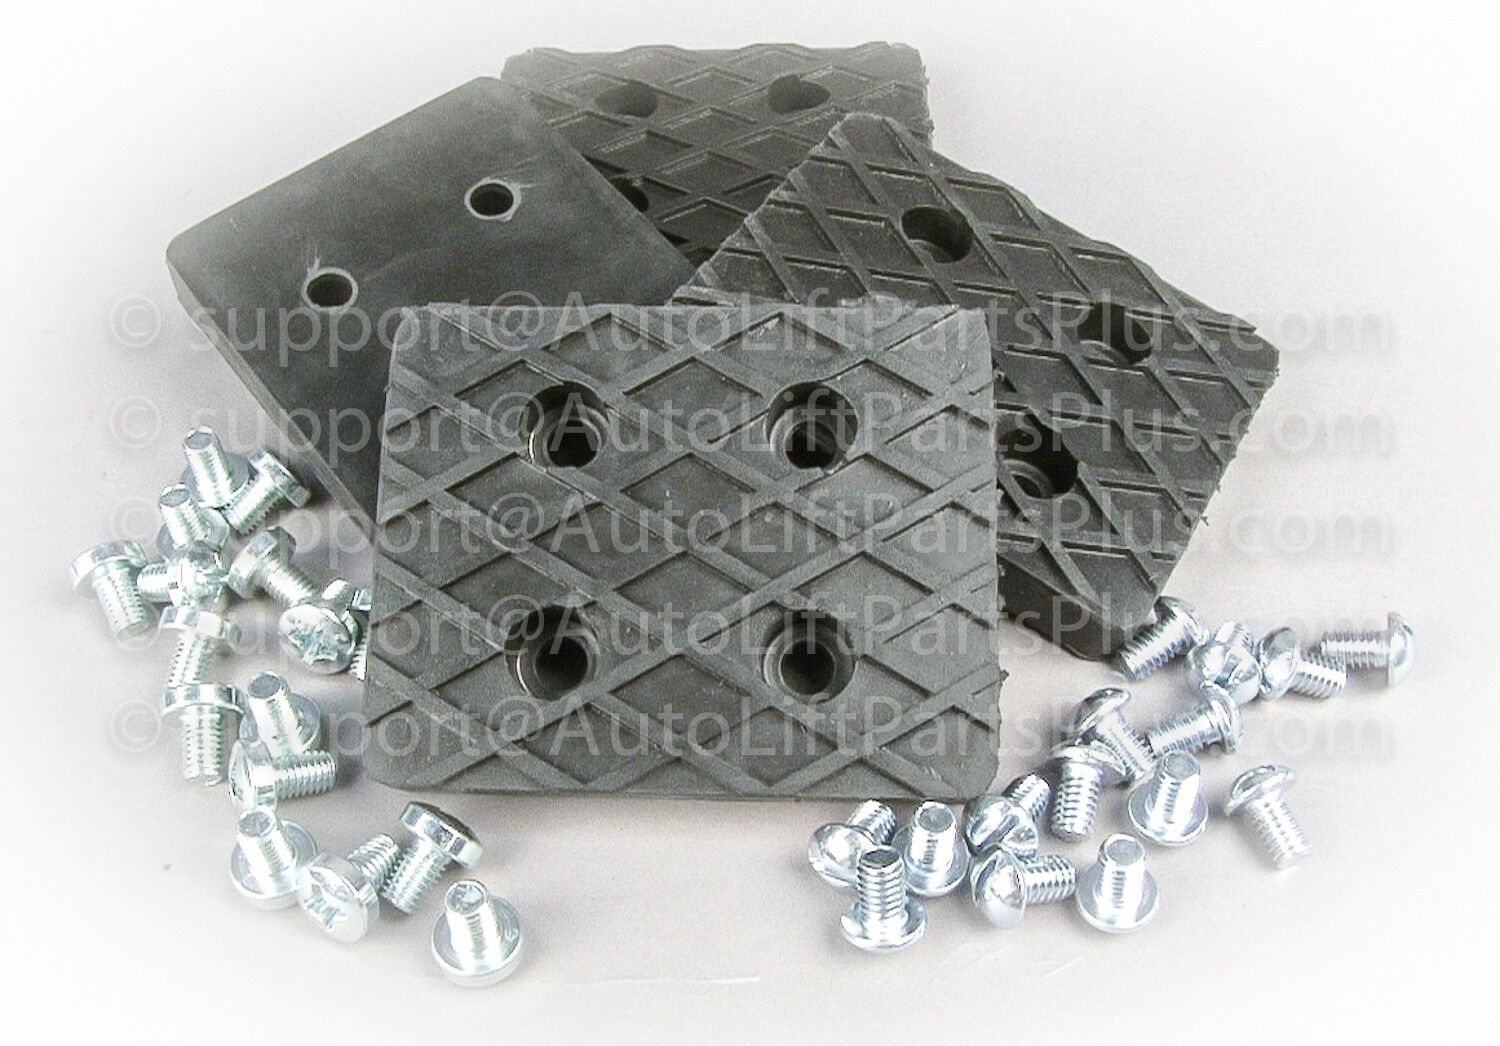 Rubber Arm Pads BENWIL Special price Lift 1005 BISHAMON 205175 Gorgeous SP710002